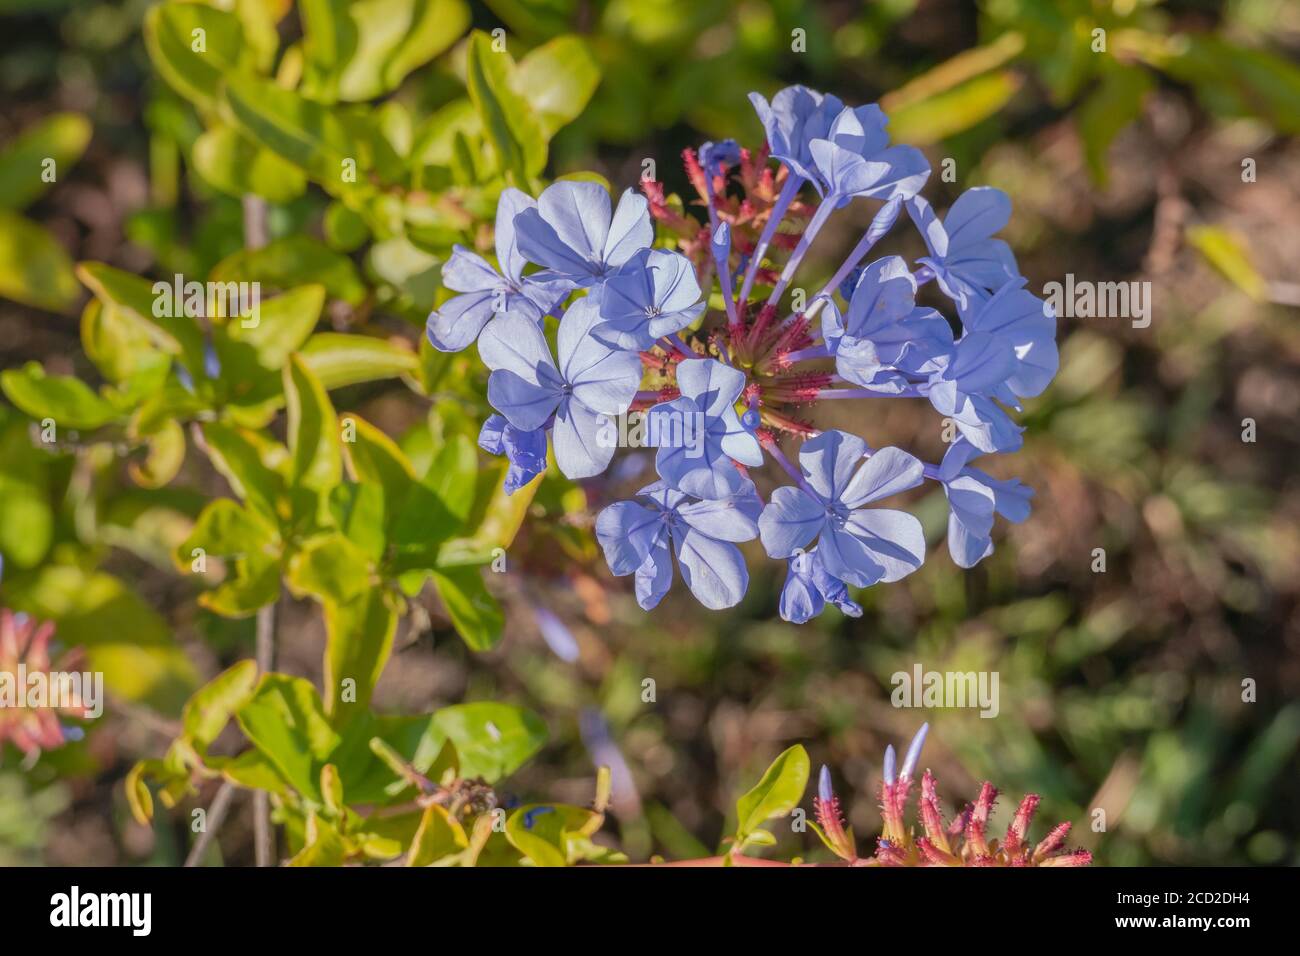 blue flowers from cape leadwort plant outdoors and sunlight Stock Photo